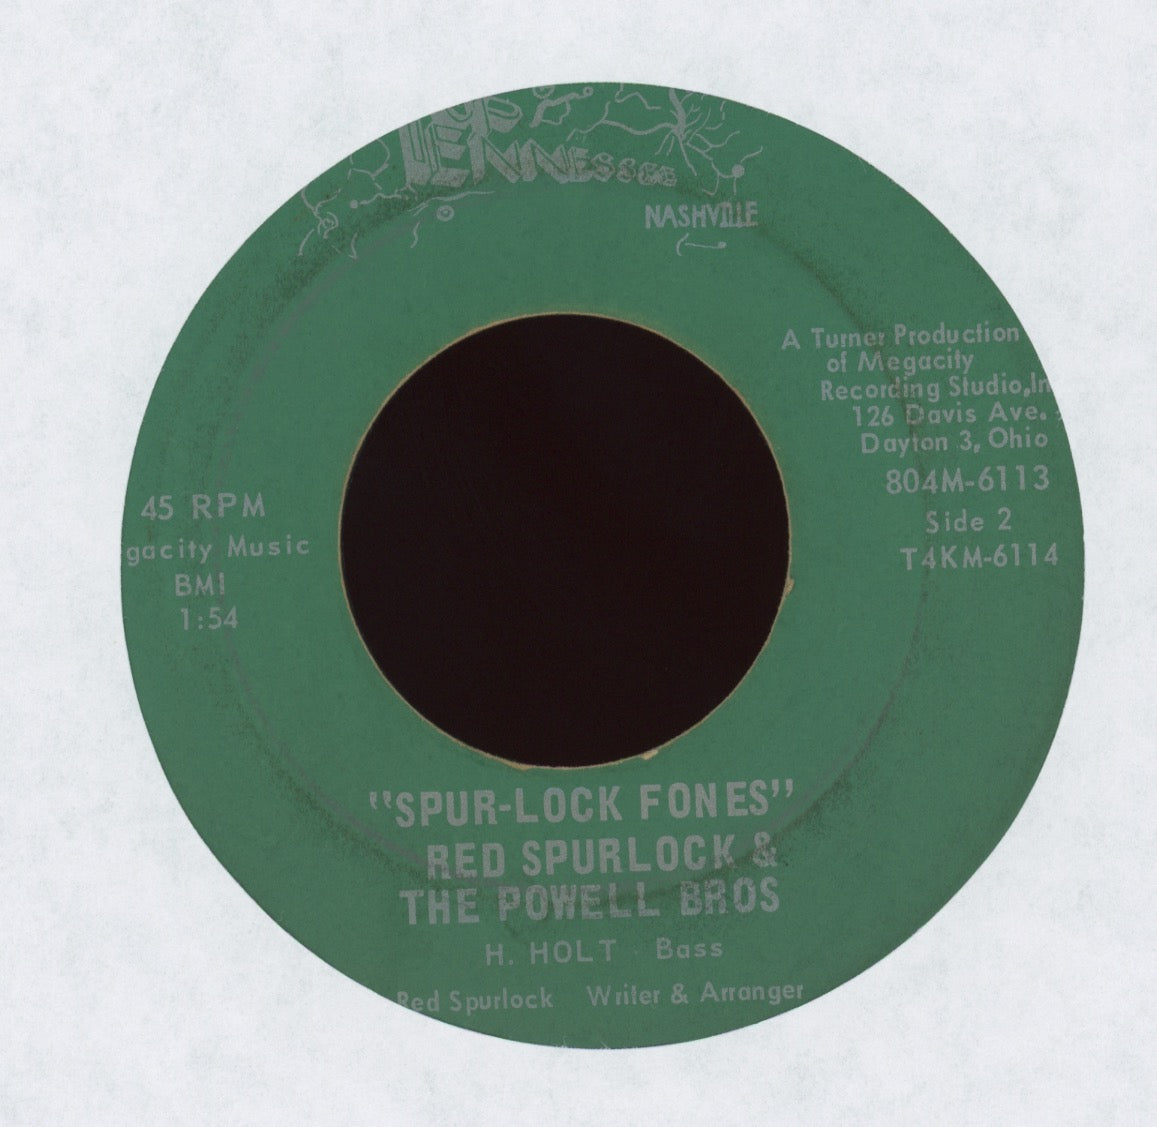 Red Spurlock - Loneliness on Top Tennessee Nashville